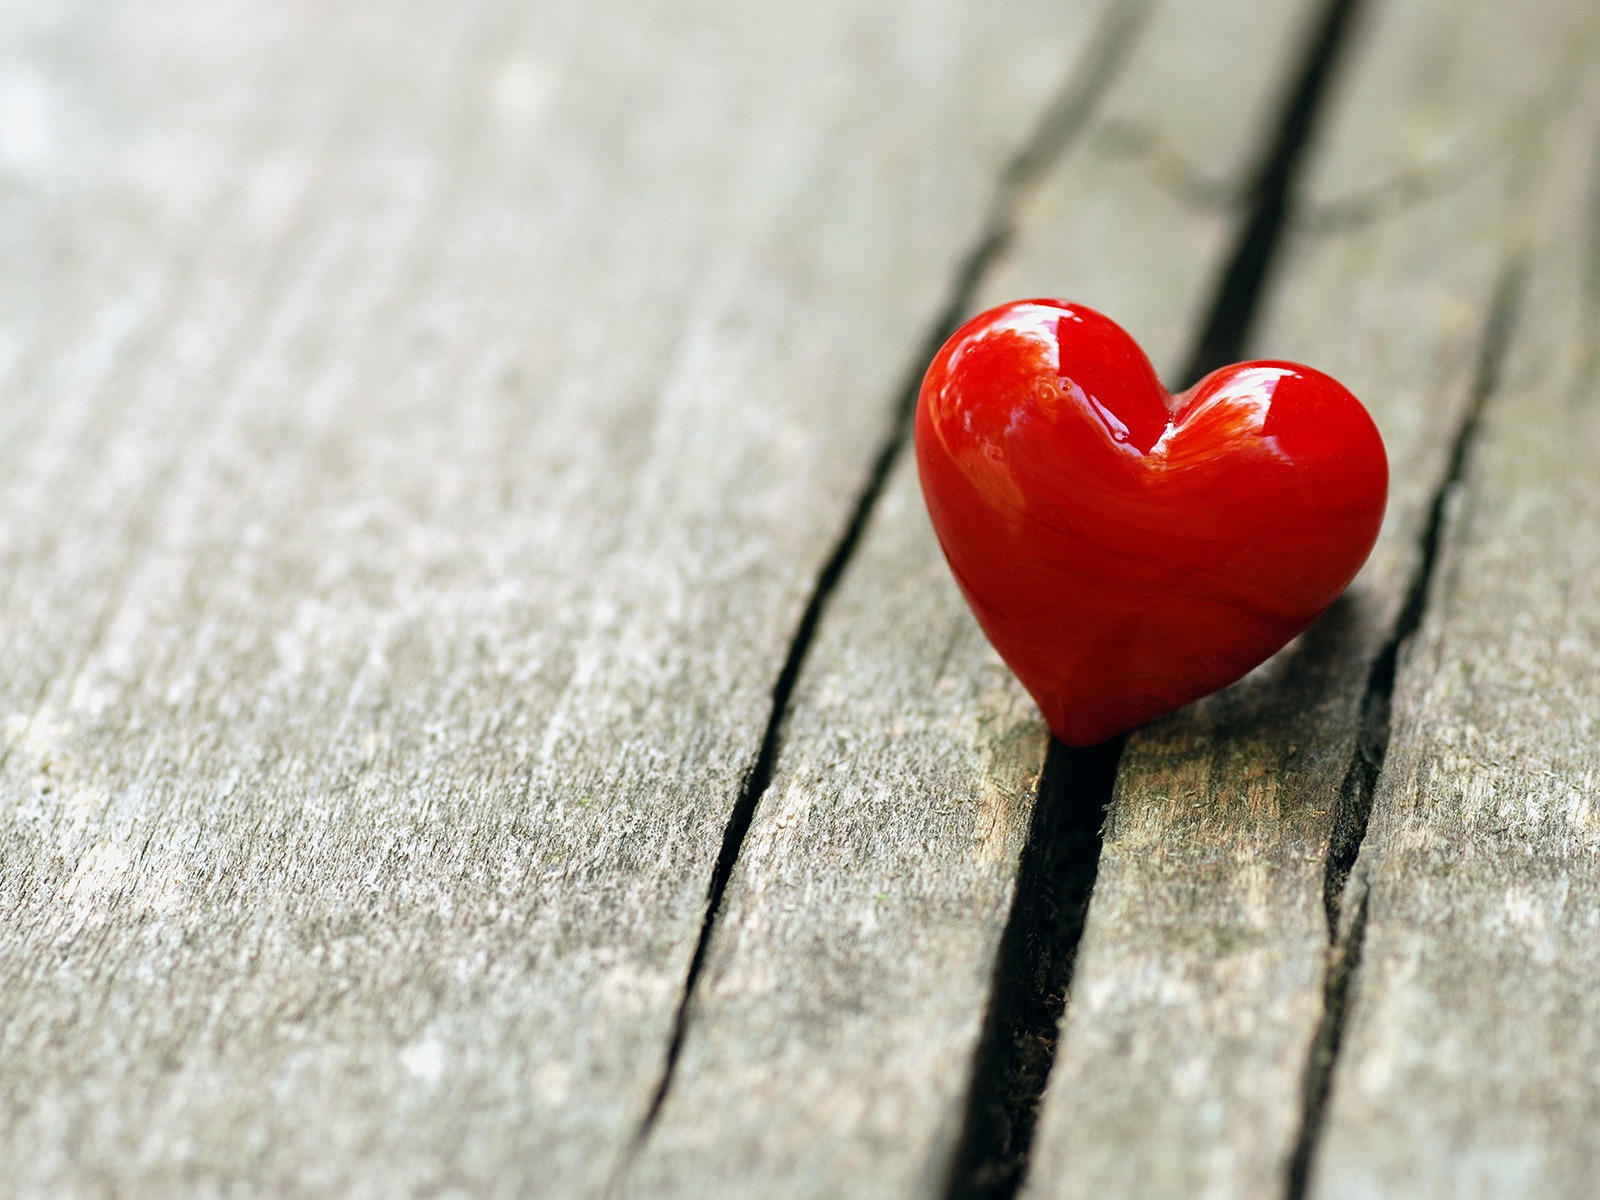 The theme of love, creative heart-shaped HD wallpapers #9 - 1600x1200